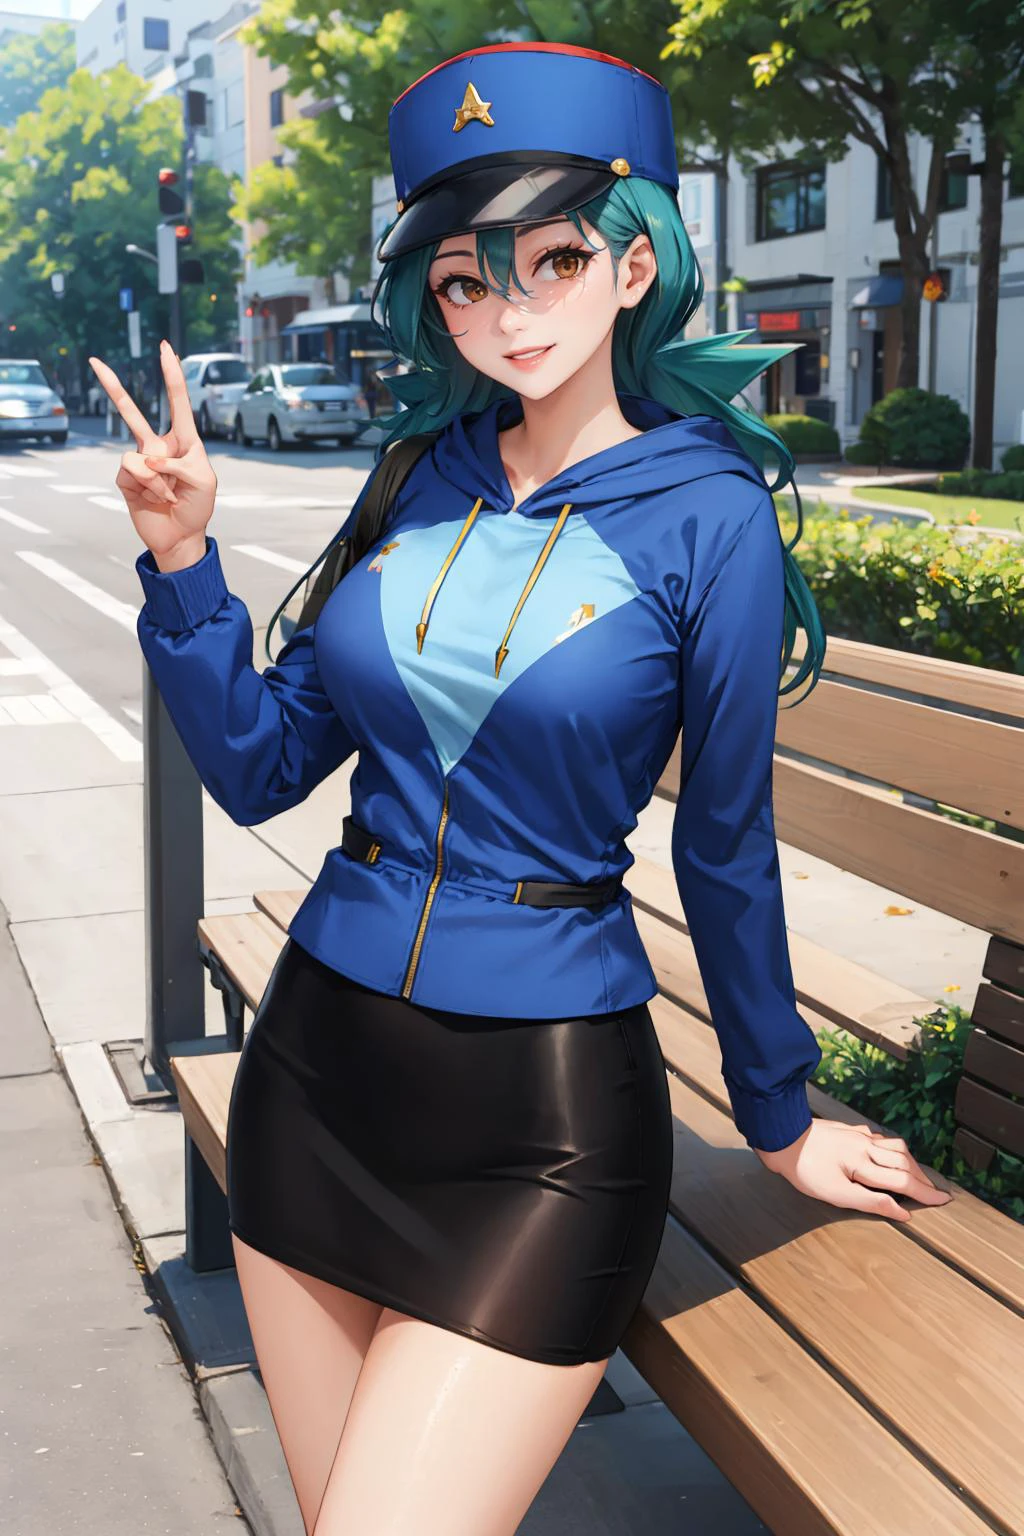 masterpiece, best quality, pkmnJenny, blue hat, blue hoodie, pencil skirt, park, bench, trees, mature woman, large breasts, high heels, cowboy shot, smile